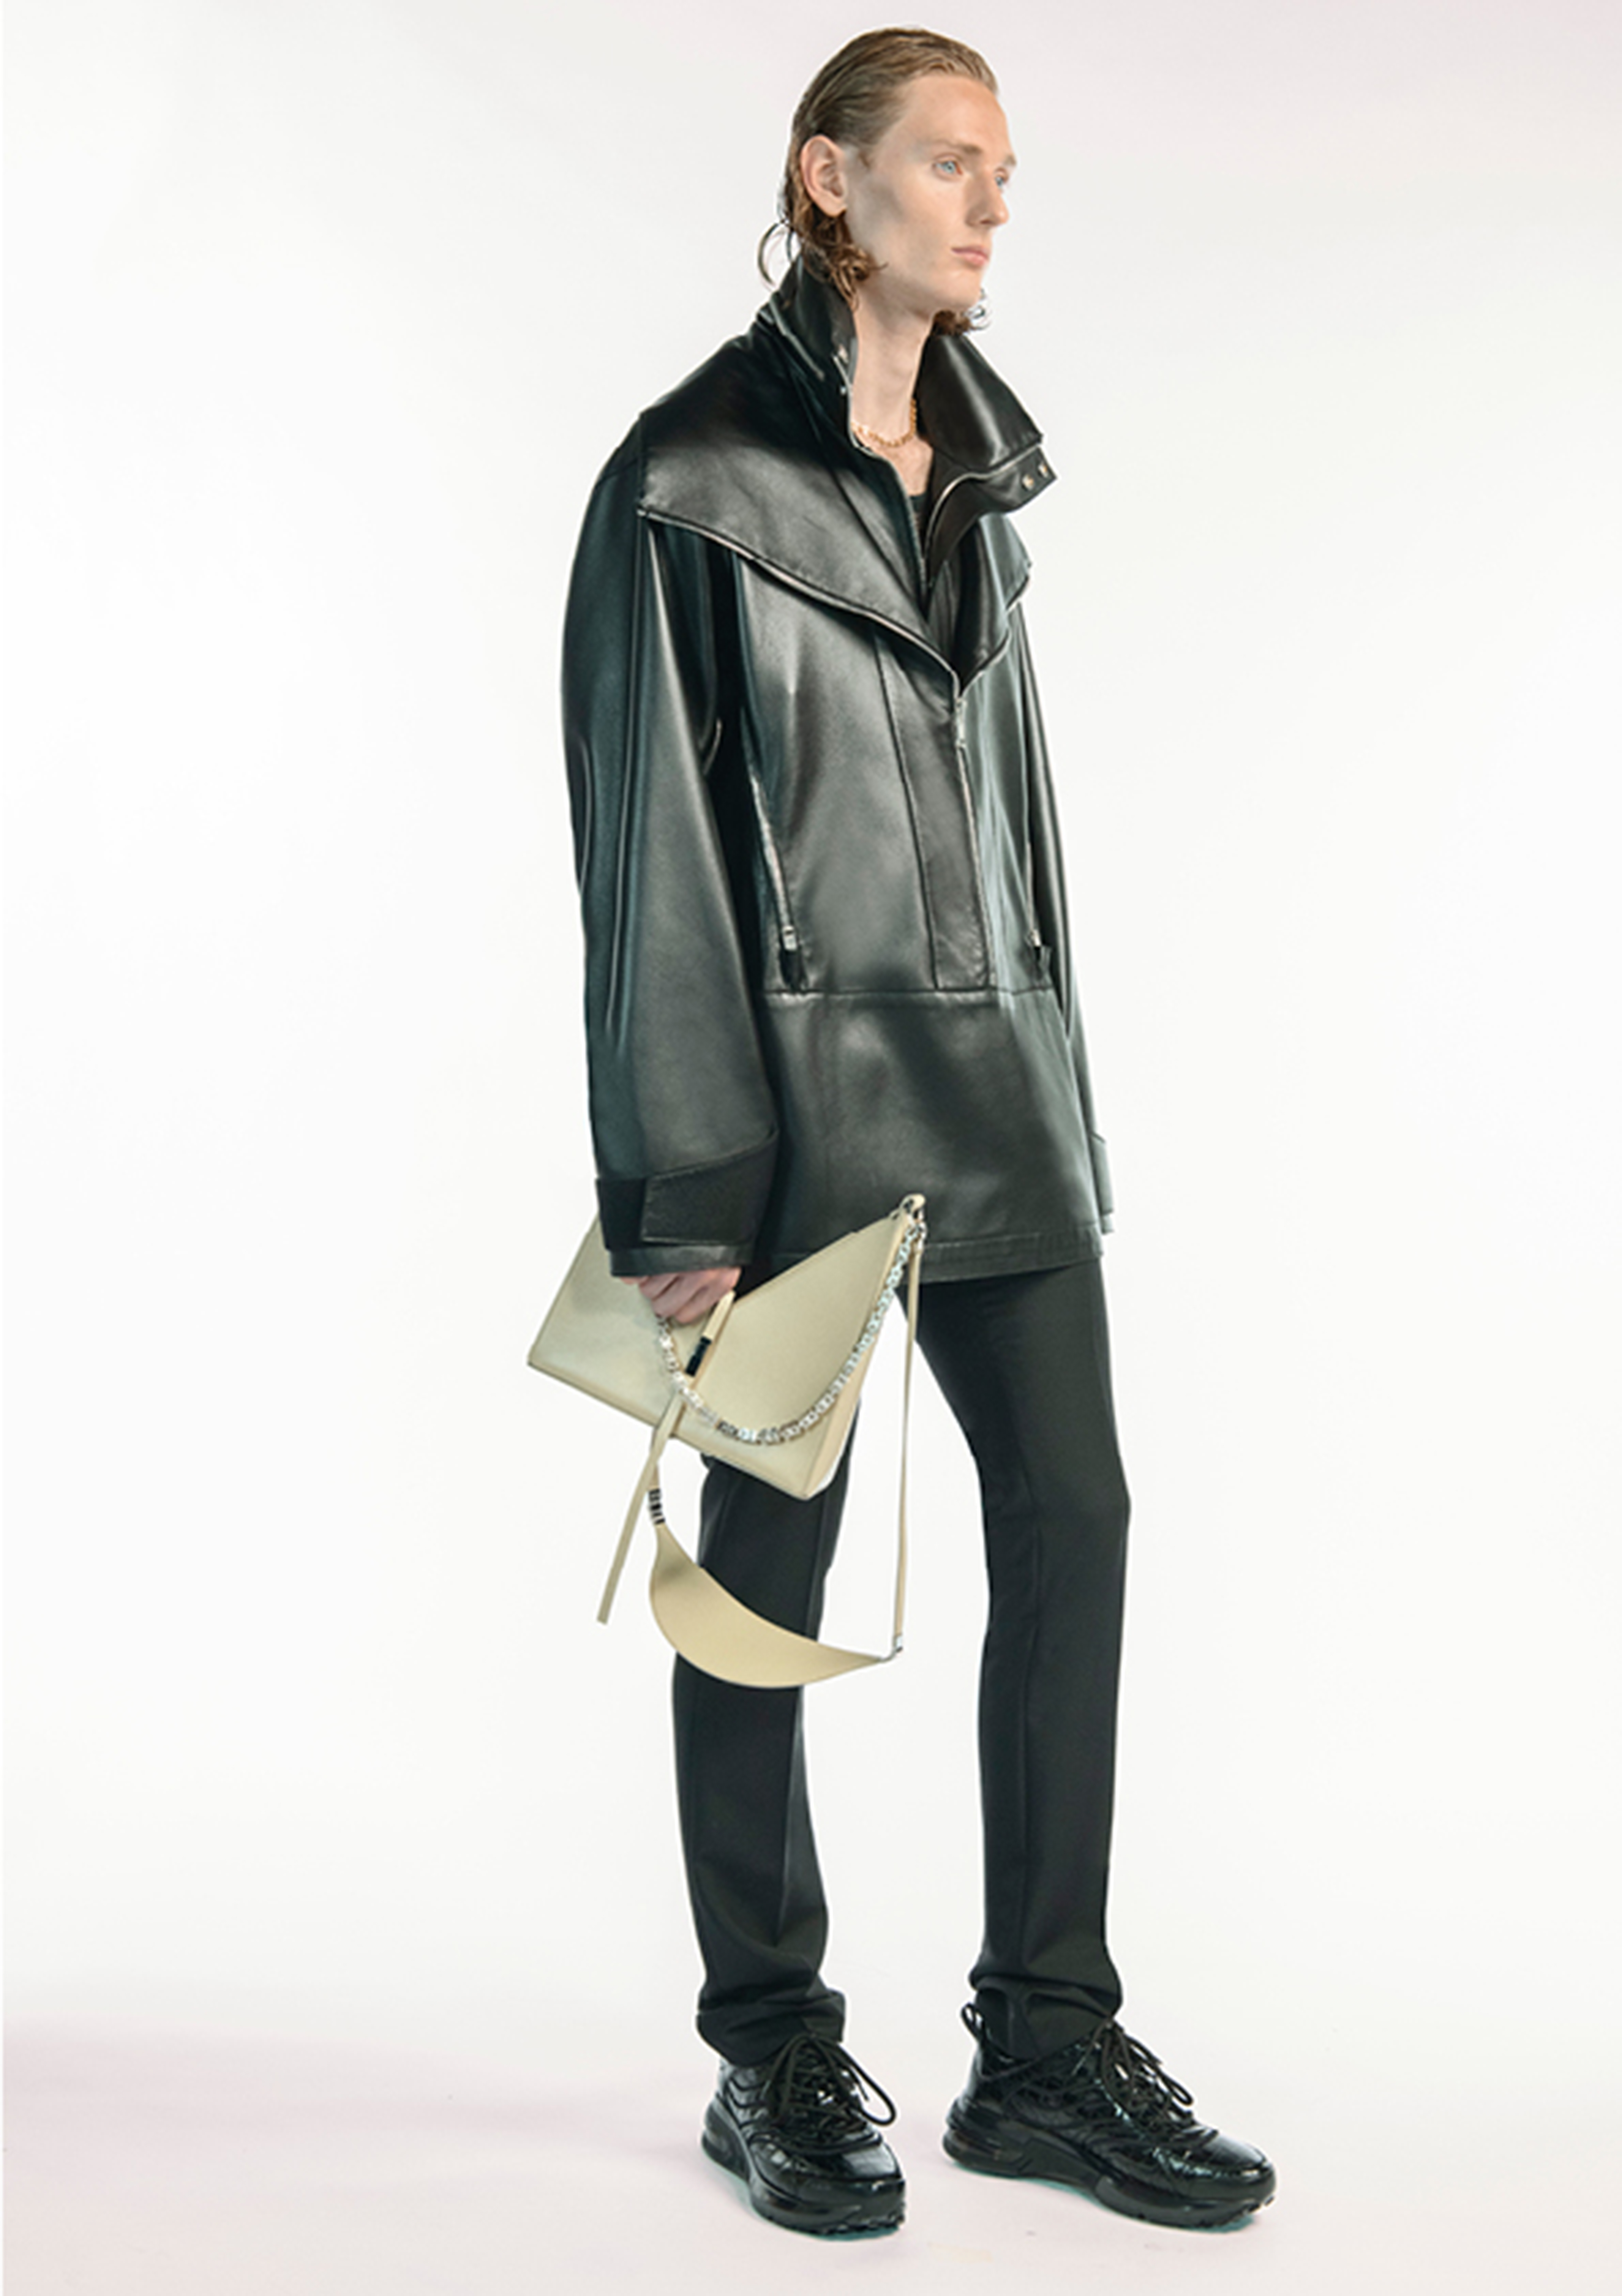 Givenchy SS21 is all about sharp cuts and luxurious hardwear